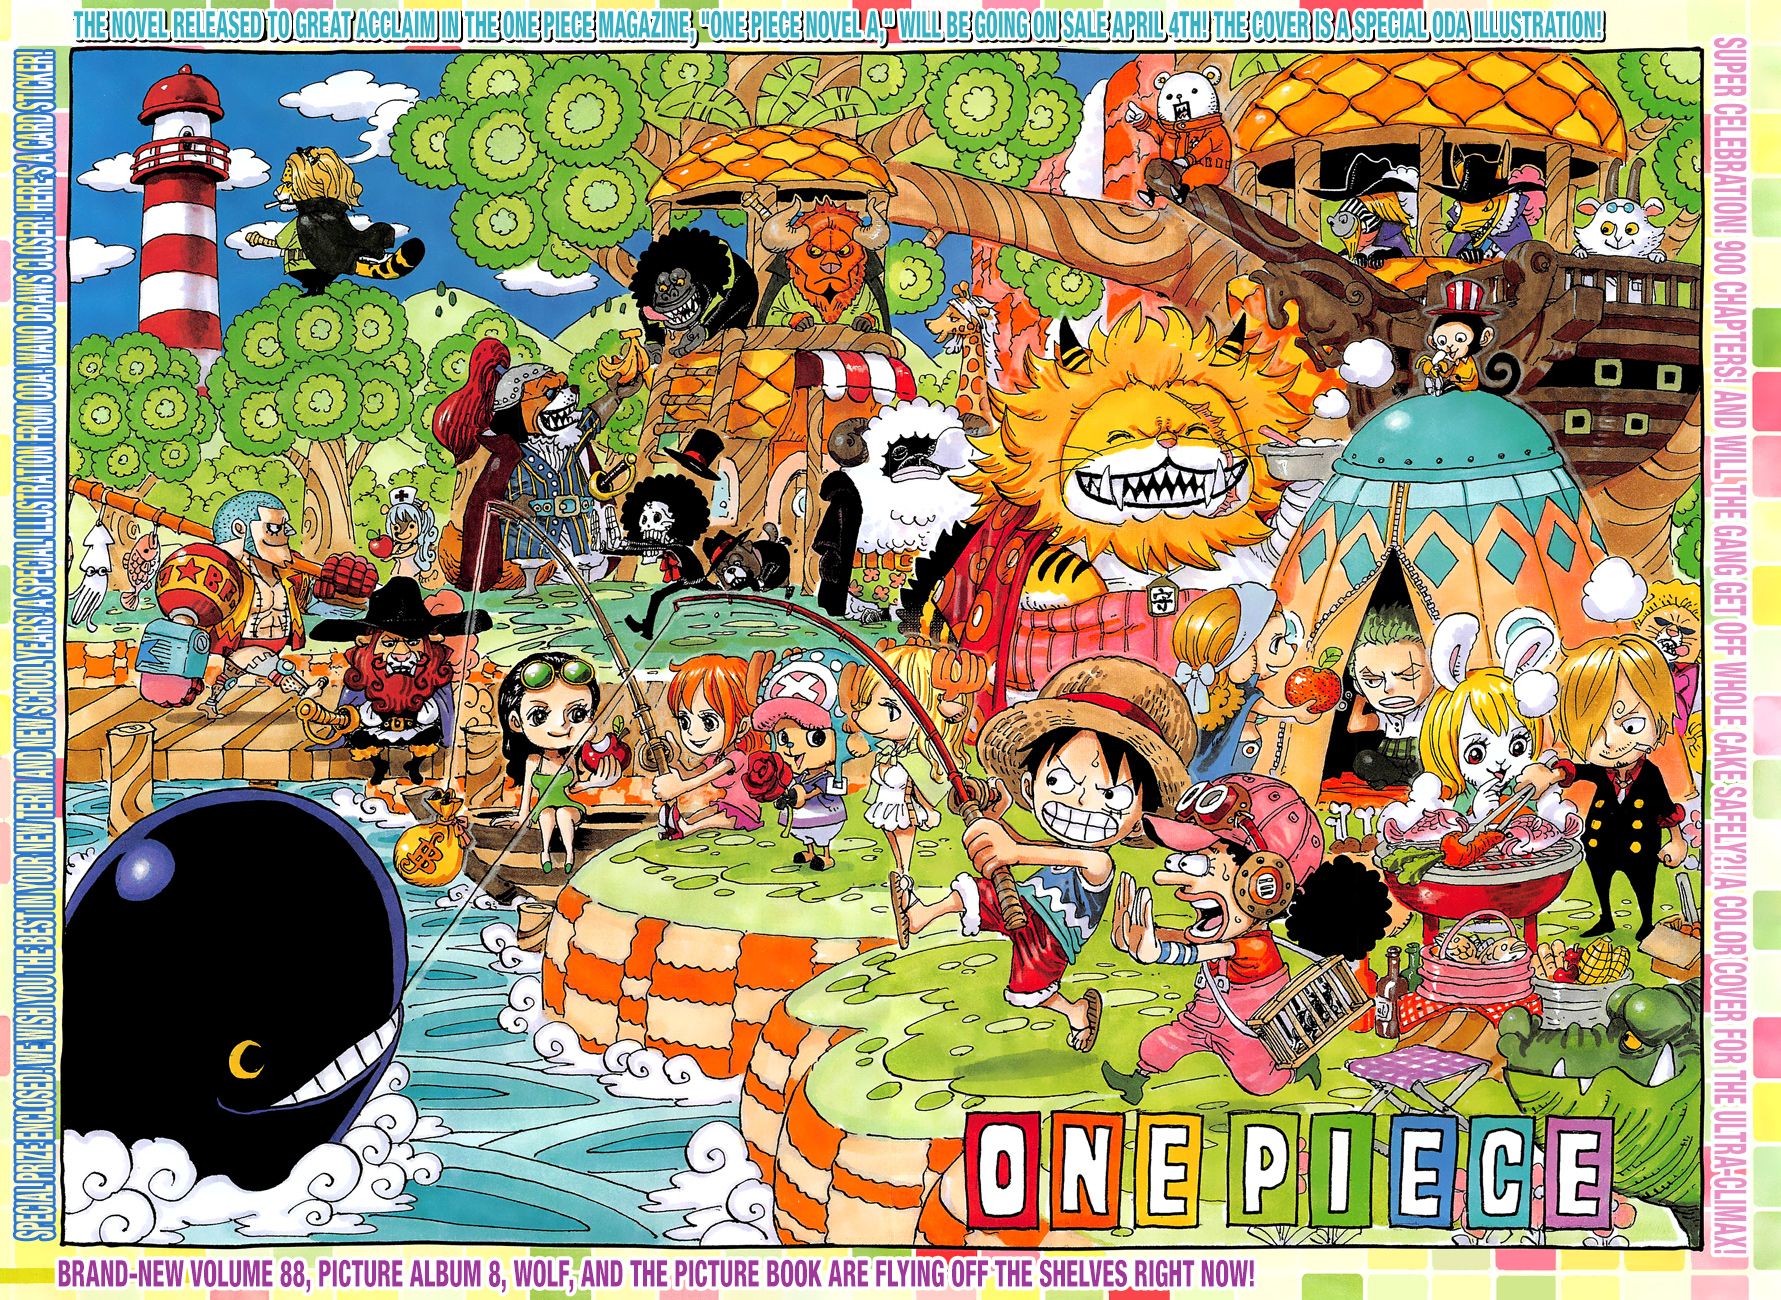 Carrot (One Piece) and Scan Gallery